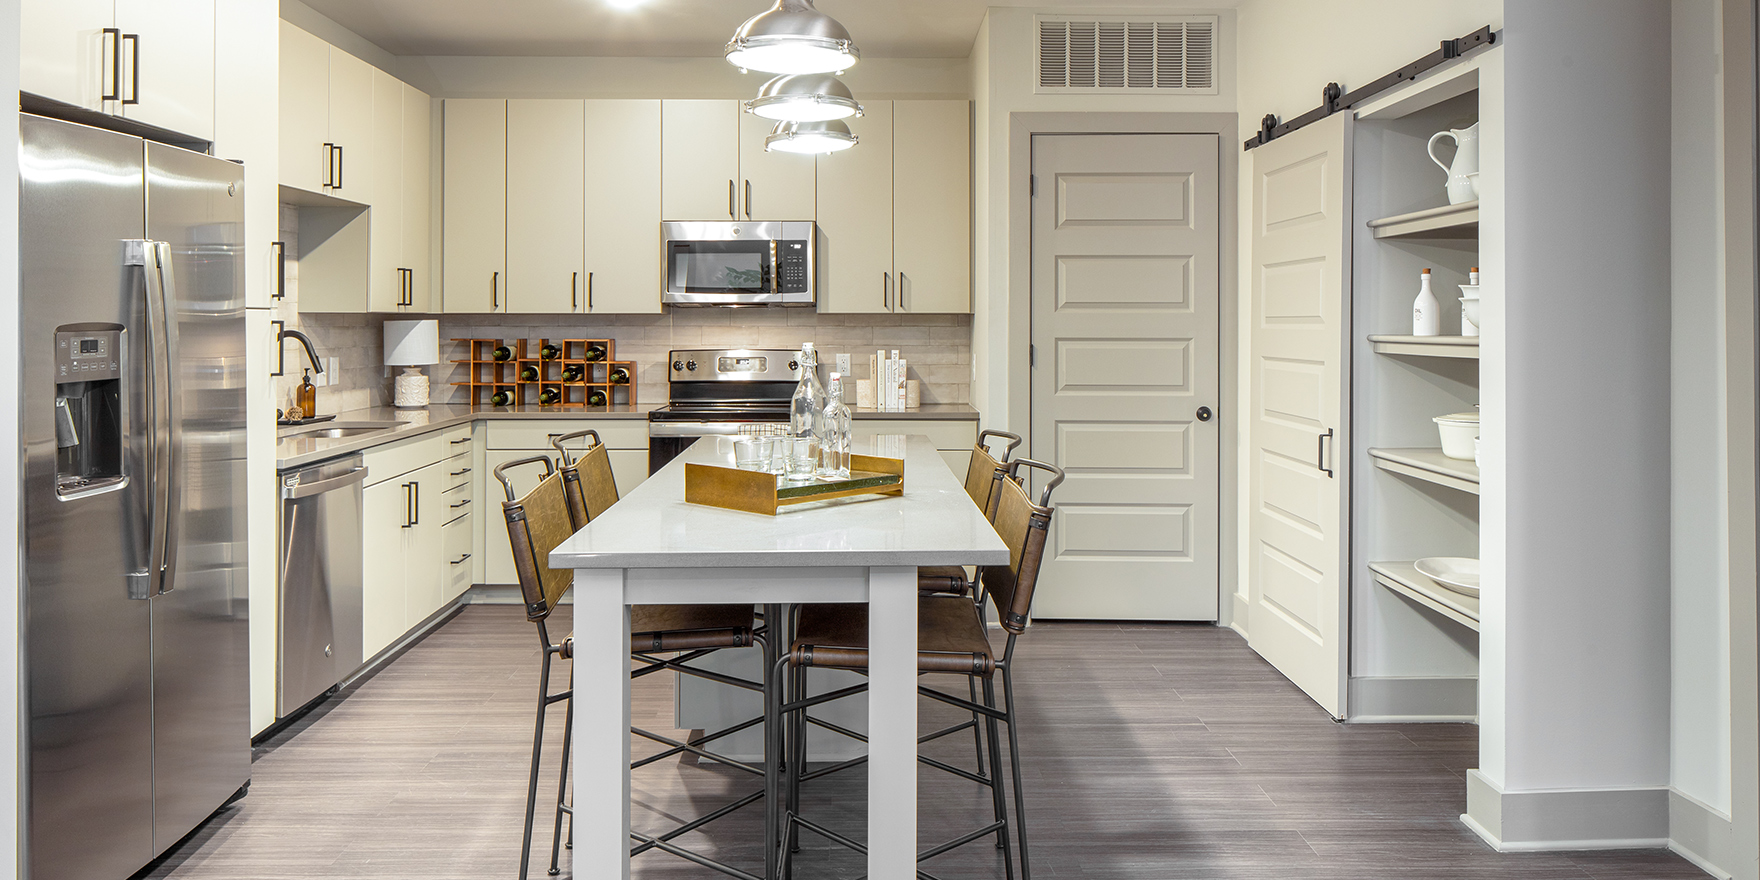 The Line two bedroom apartment kitchen with kitchen dining table/ island and farmhouse sliding door